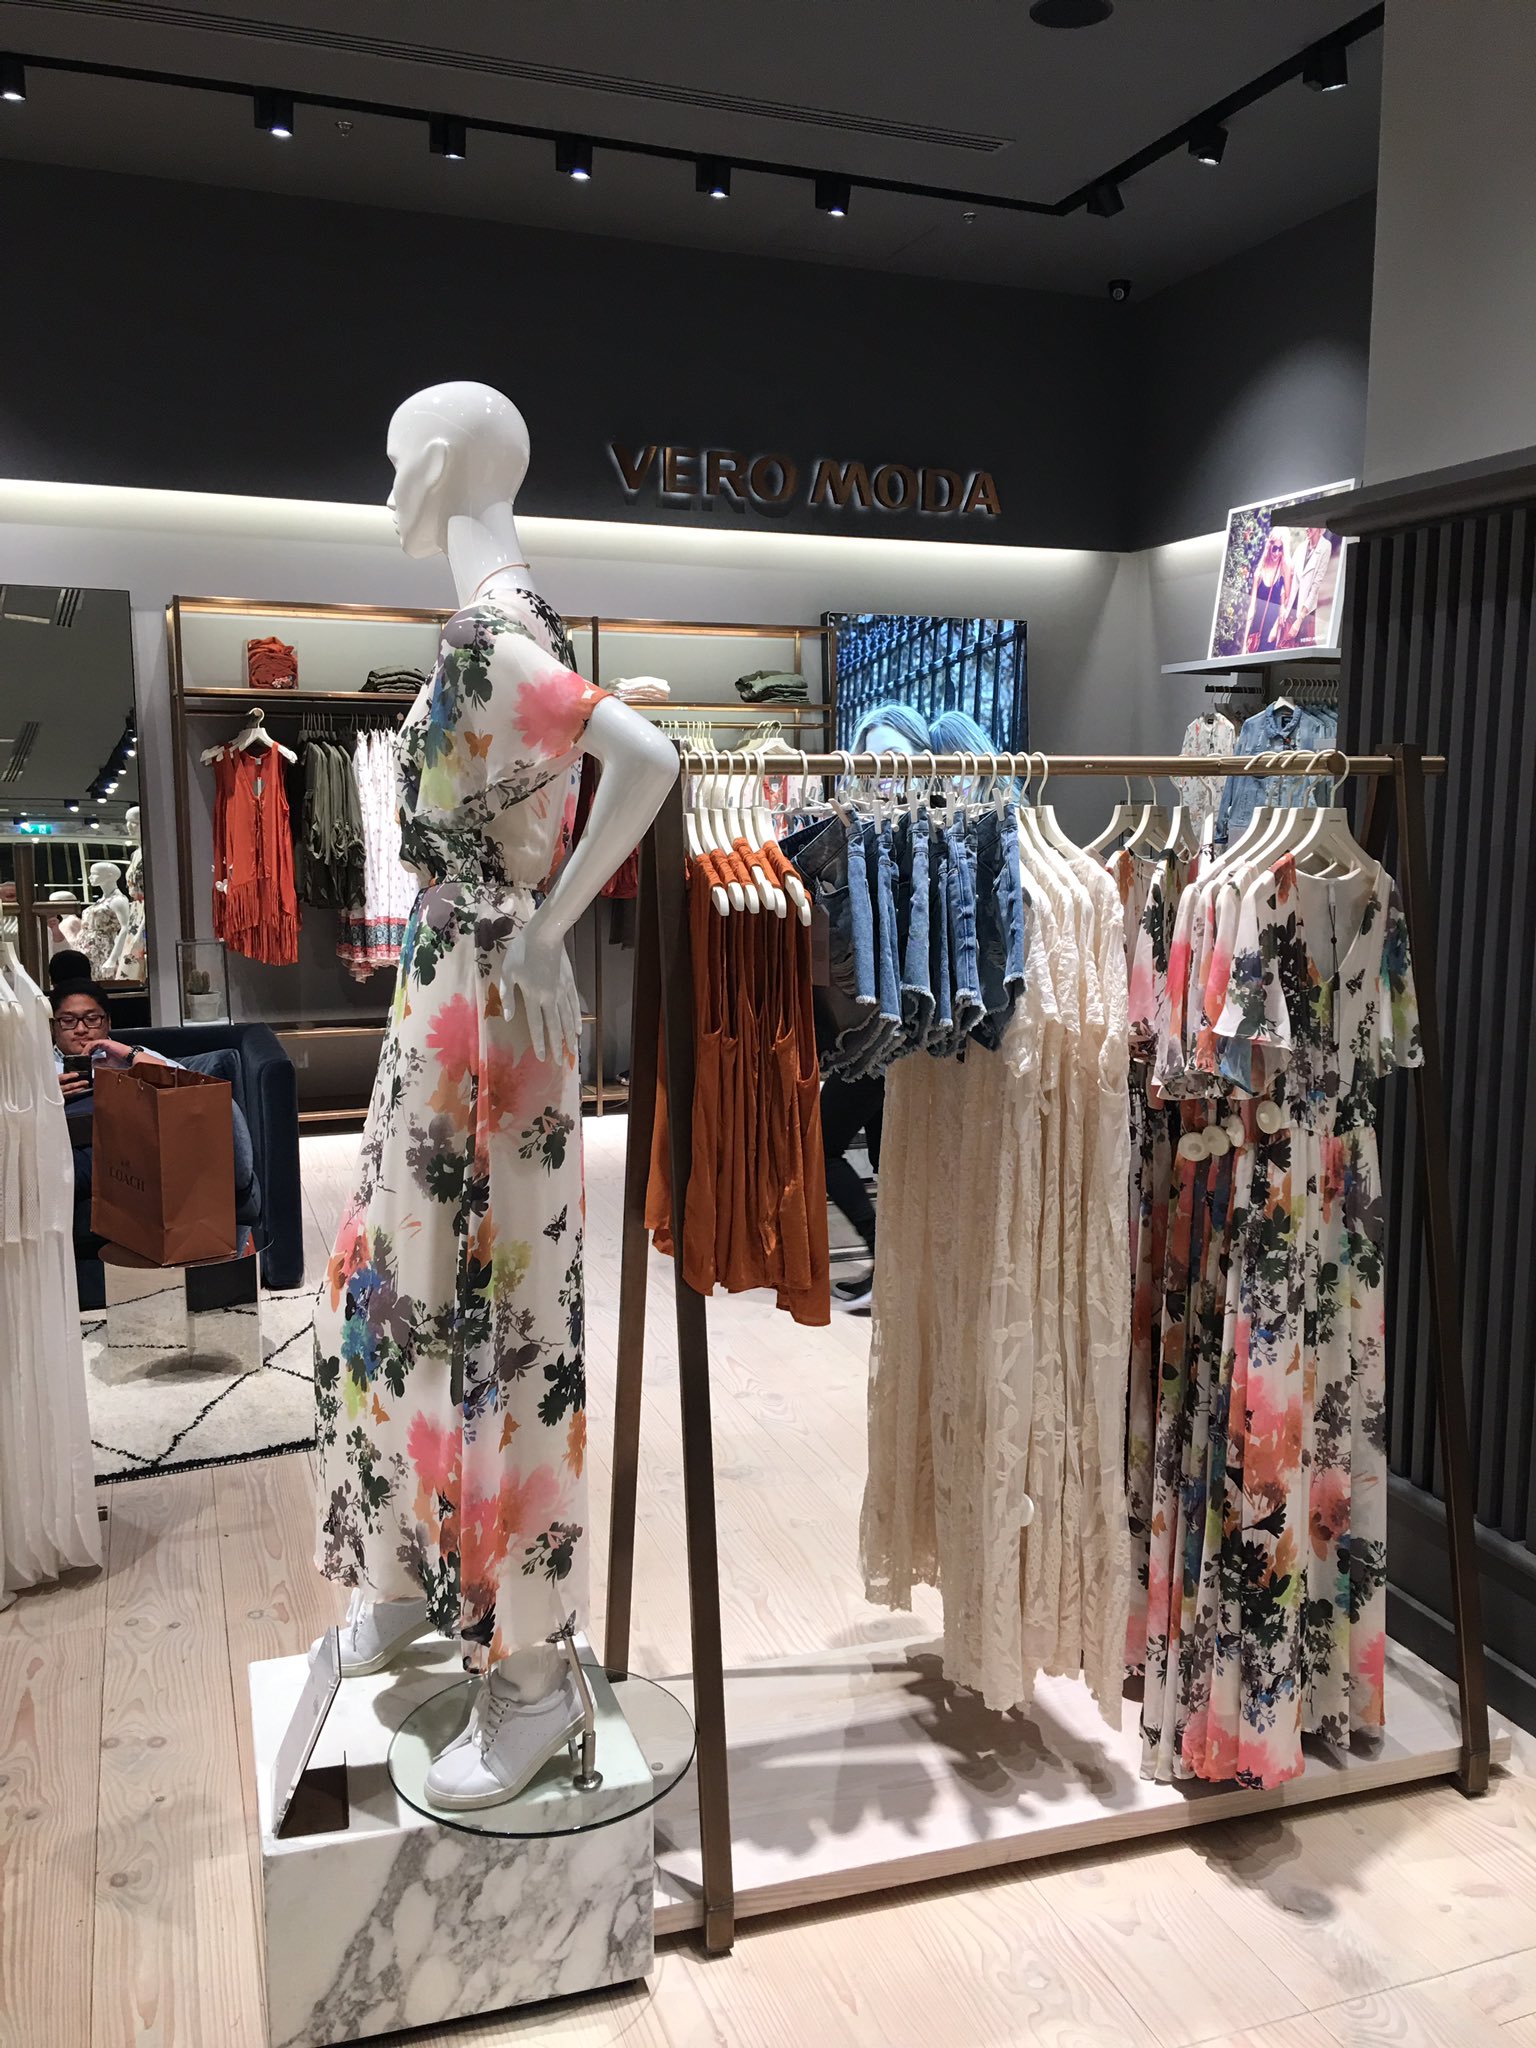 magasin Medarbejder kemikalier Alastair Kean on Twitter: "Saw the new Vero Moda in Dubai Mall, looks  higher quality and lower in density, looking all together more grown up.  https://t.co/GMeU4ZKkWj" / Twitter